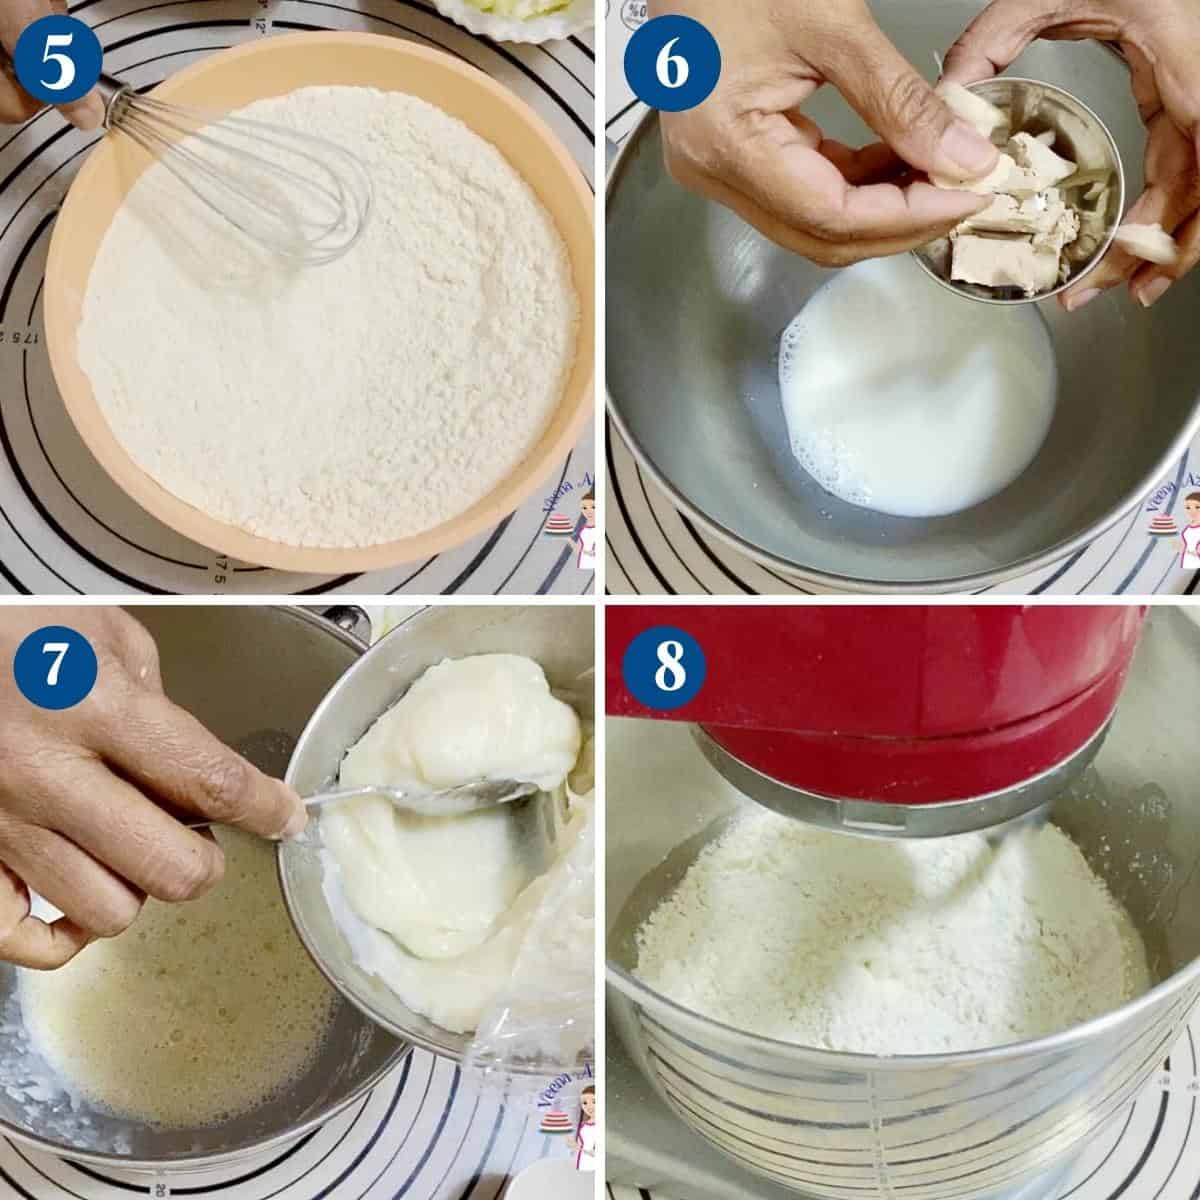 Progress pictures collage making the bread dough.